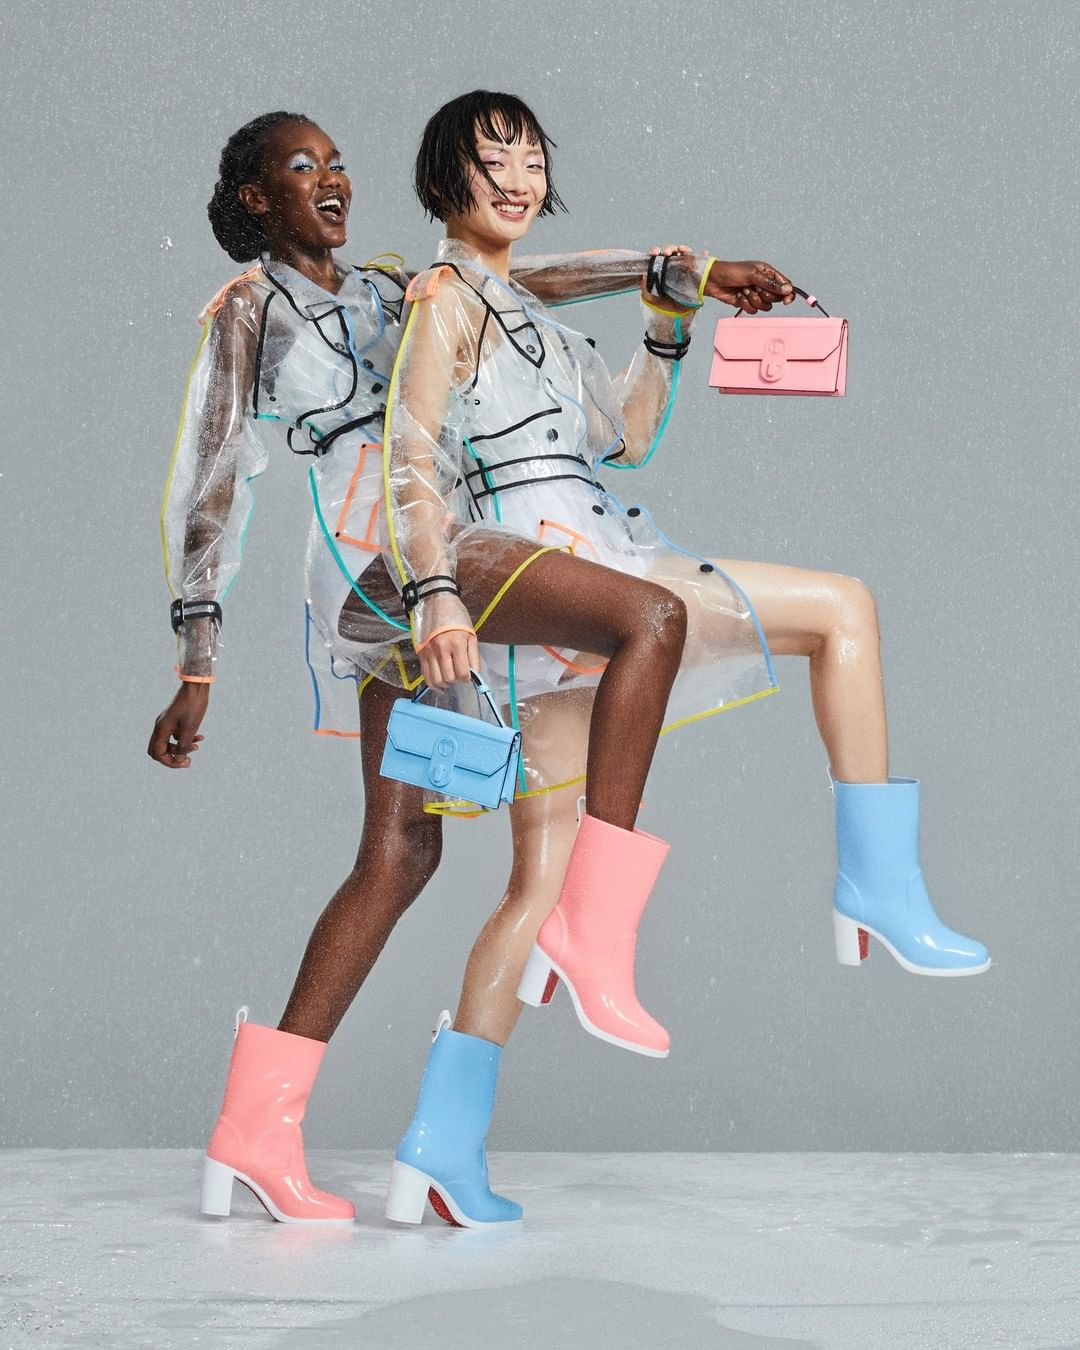 Two models show off their Christian Louboutin’s Loubirain rain boots and matching small Elisa Baguette clutch bags